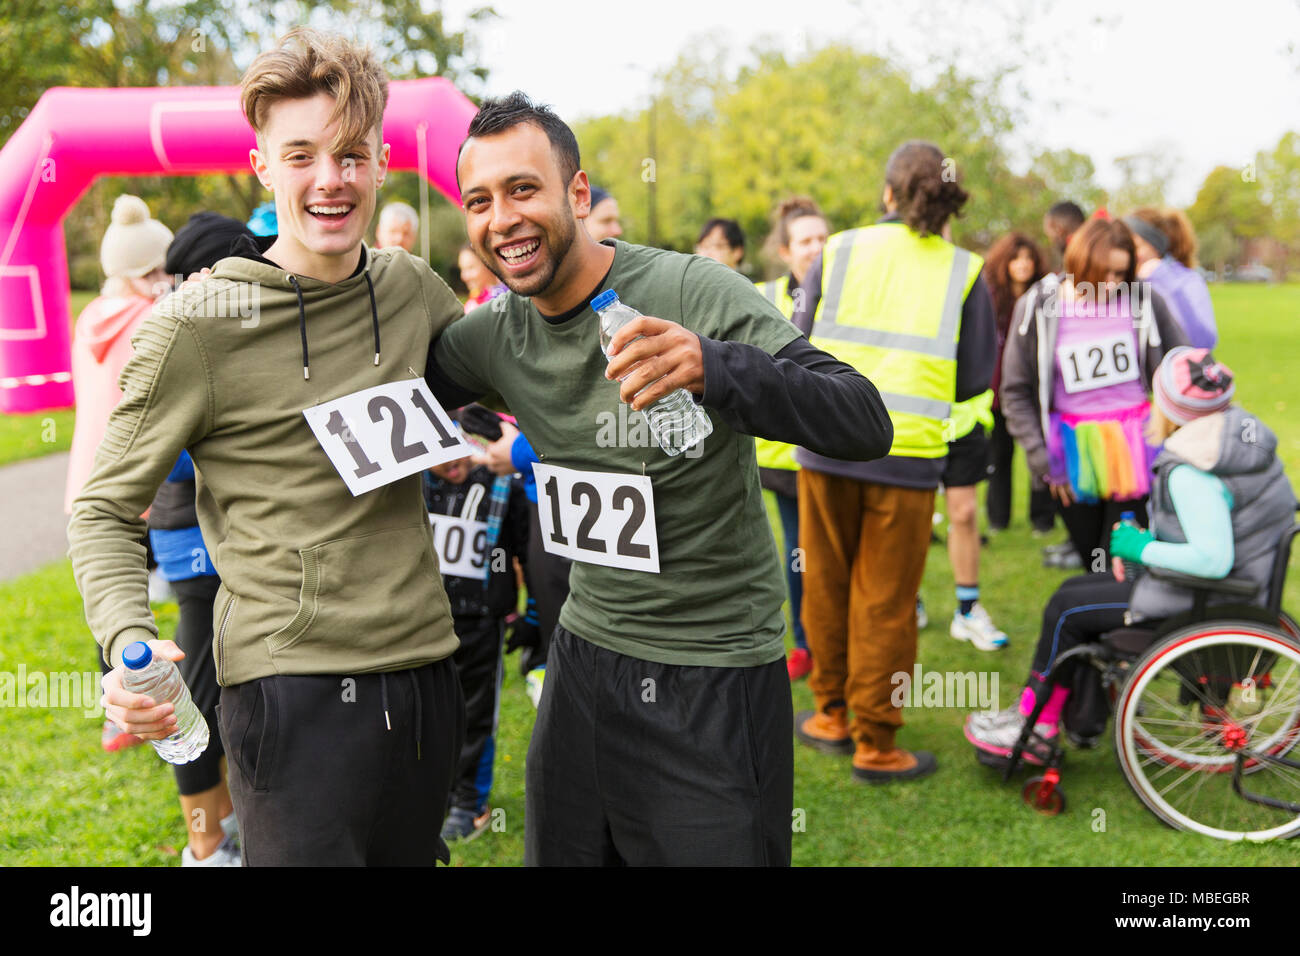 Portrait enthusiastic male runner friends with water hugging at charity run finish line in park Stock Photo